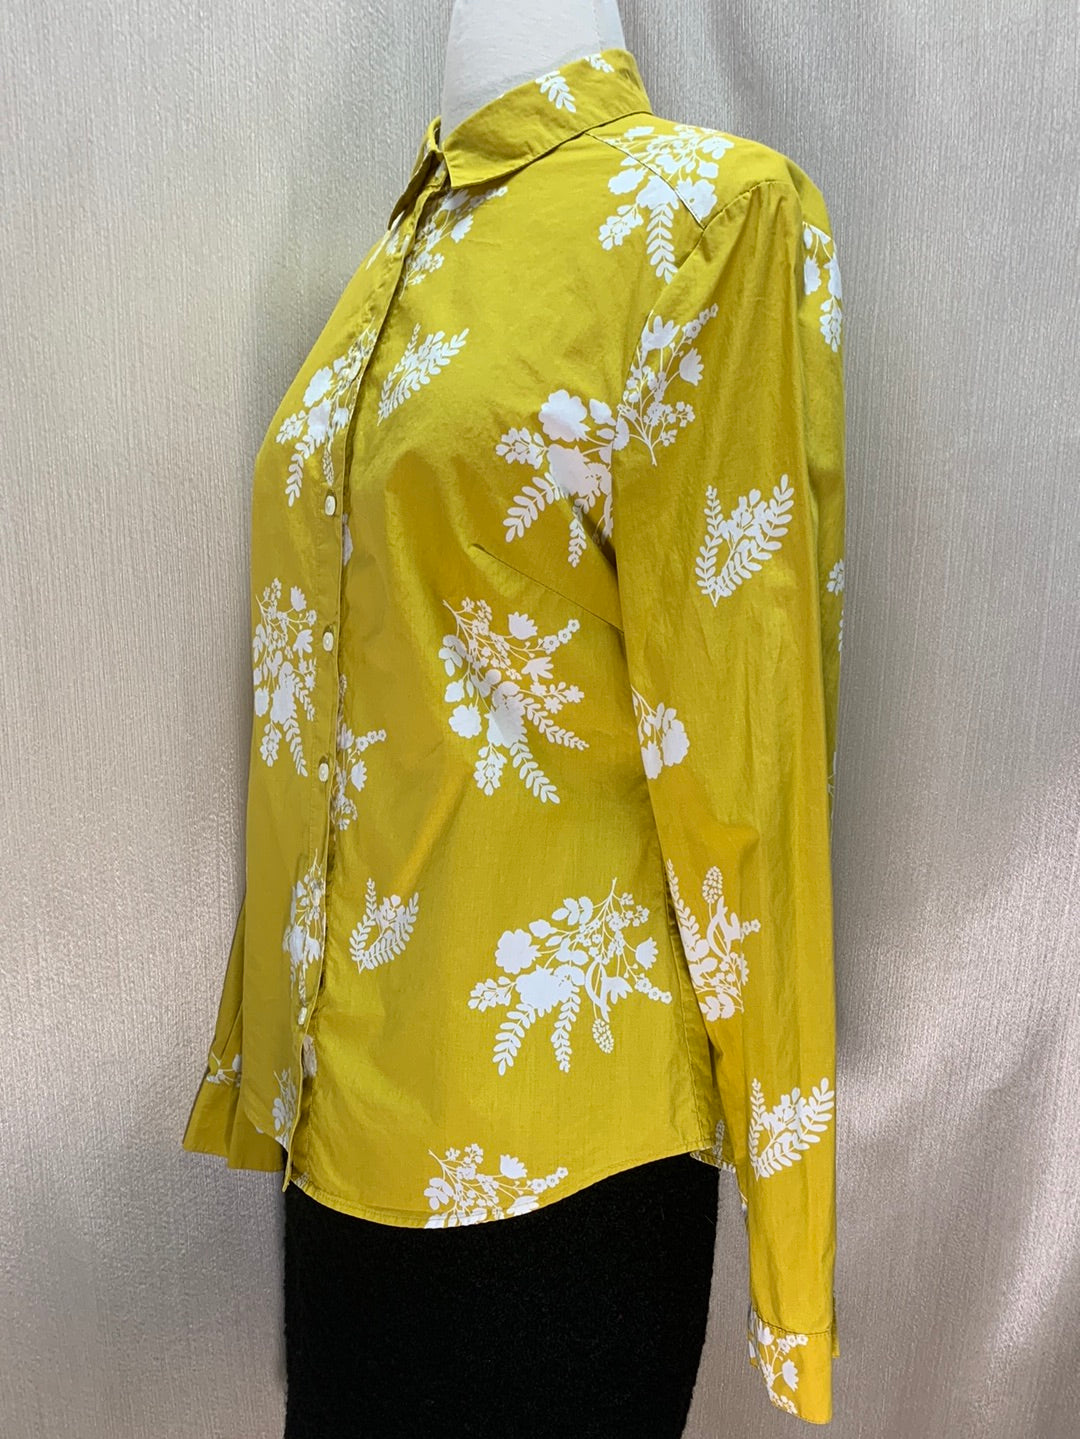 BODEN mustard yellow floral Button Up Long Sleeve Classic Shirt - US 8